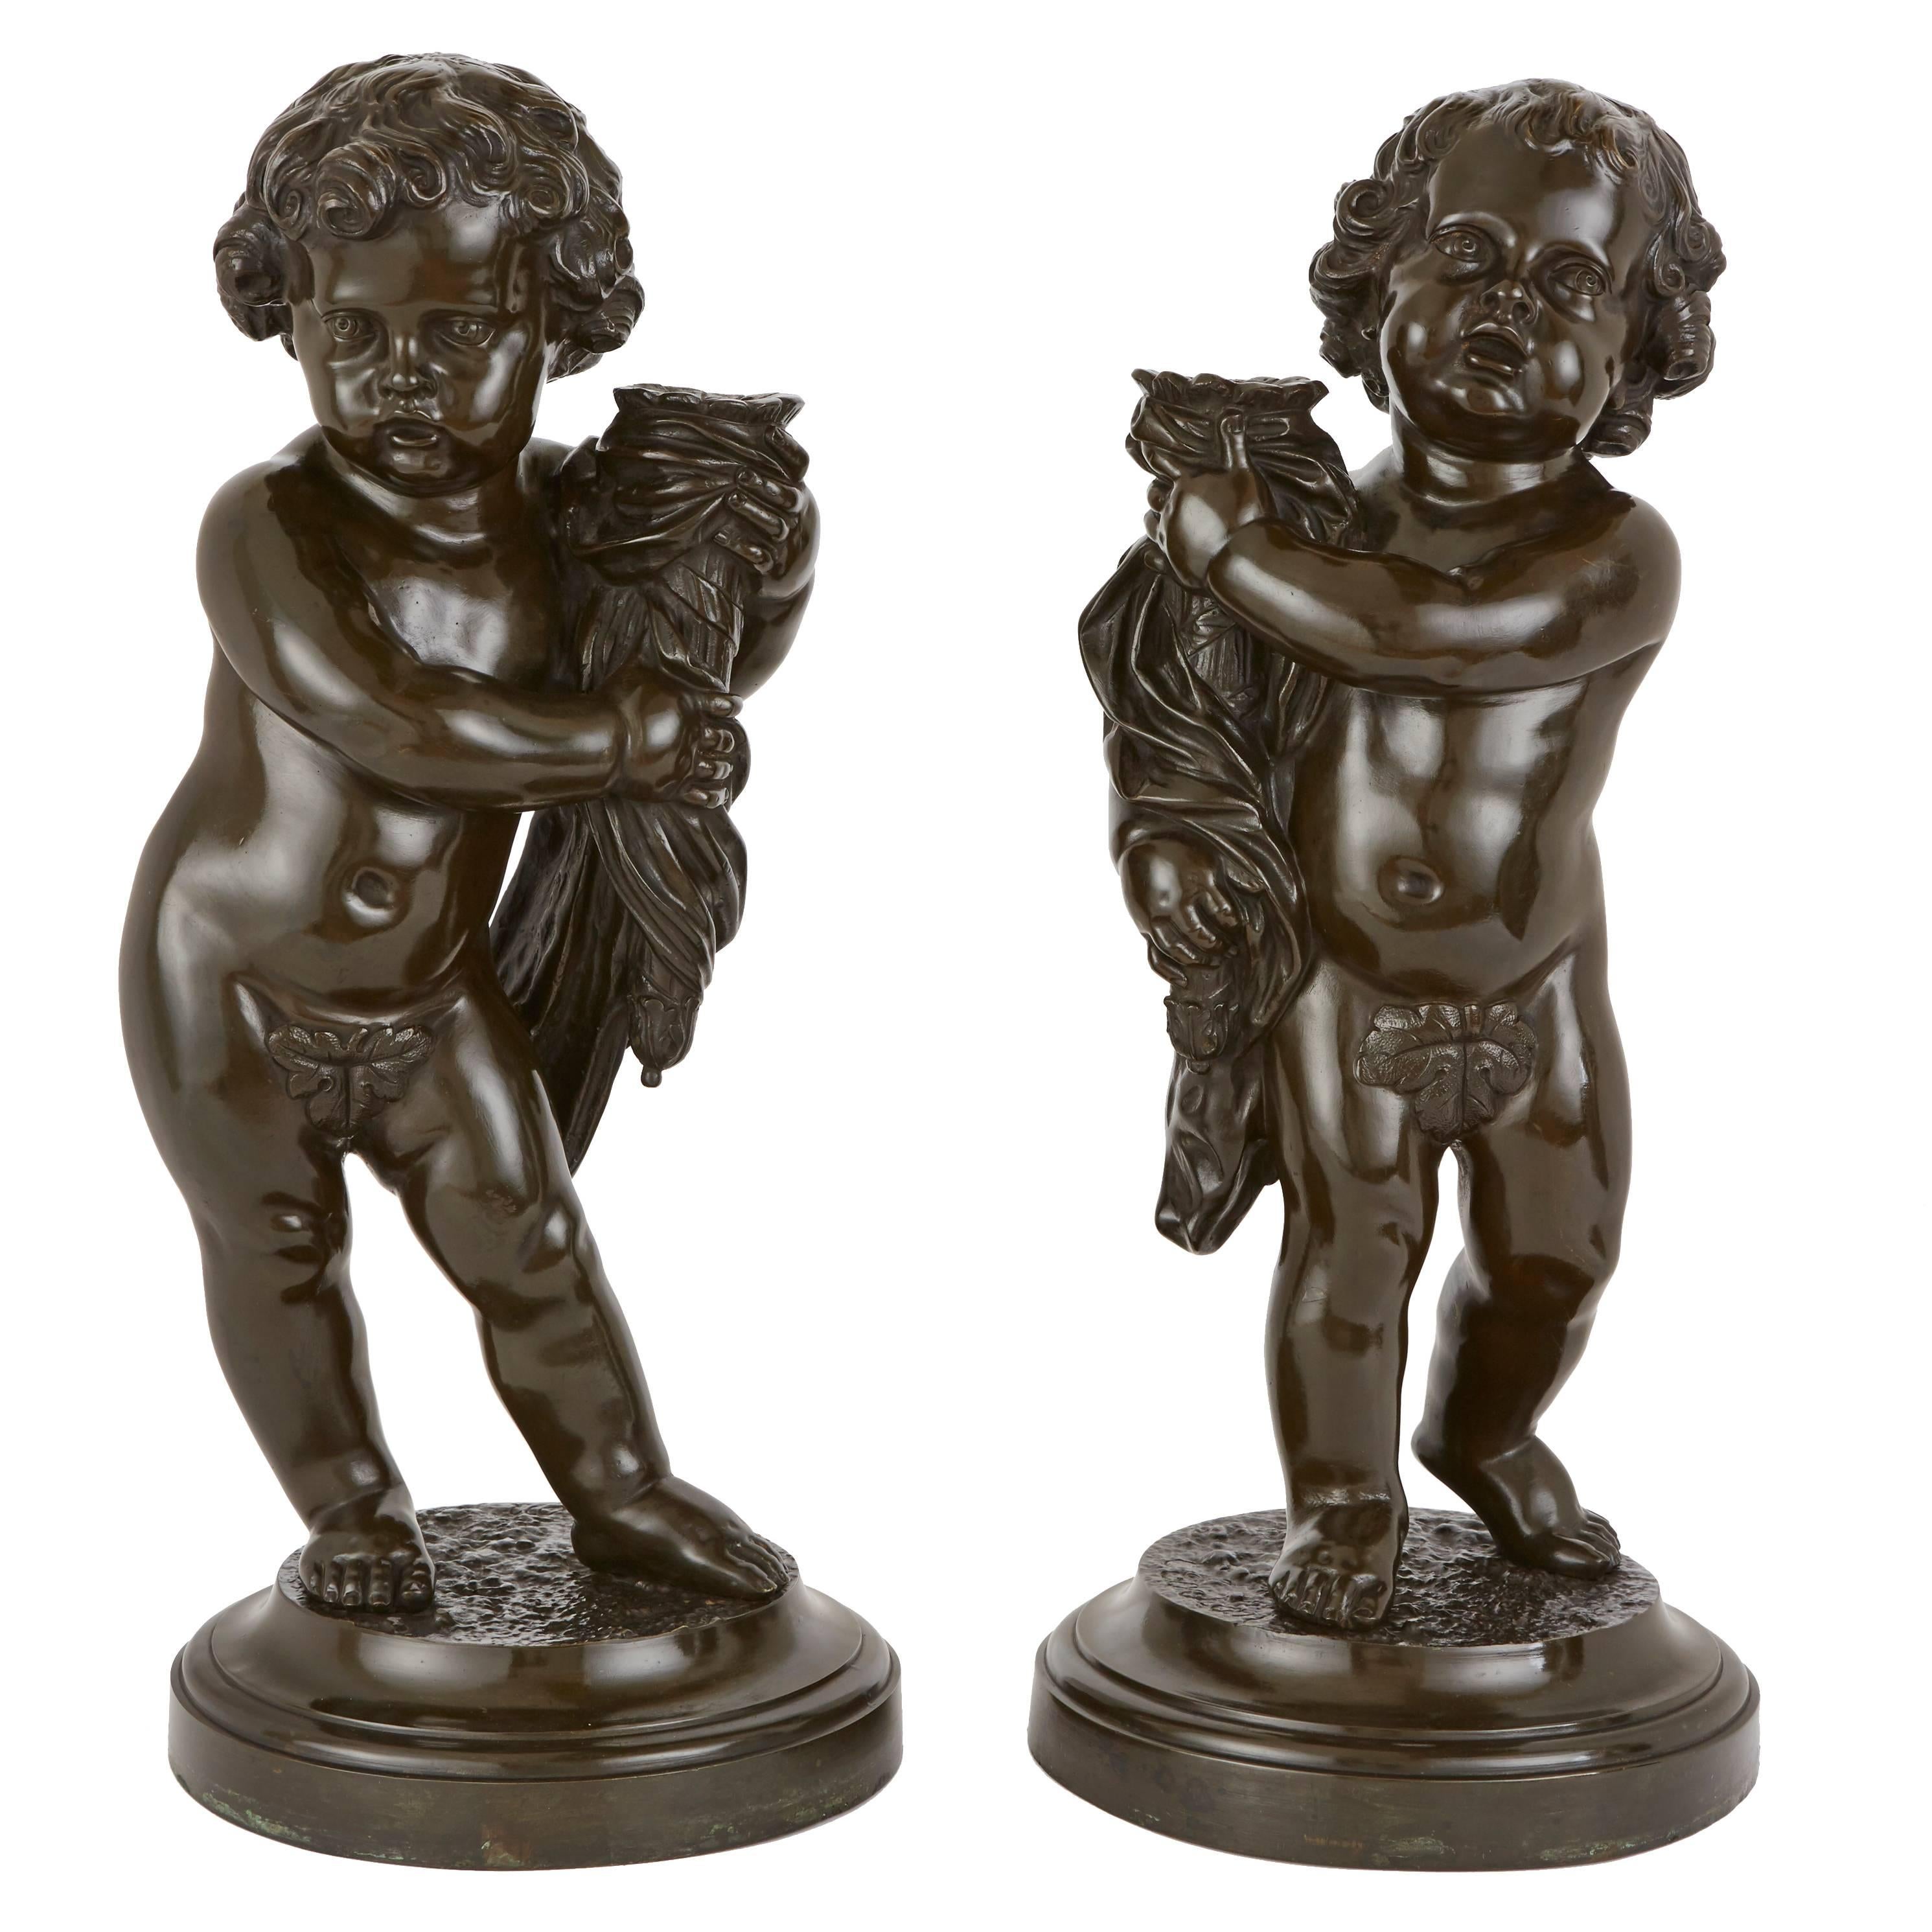 Pair of Patinated Bronze Antique Cherubs, after Clodion